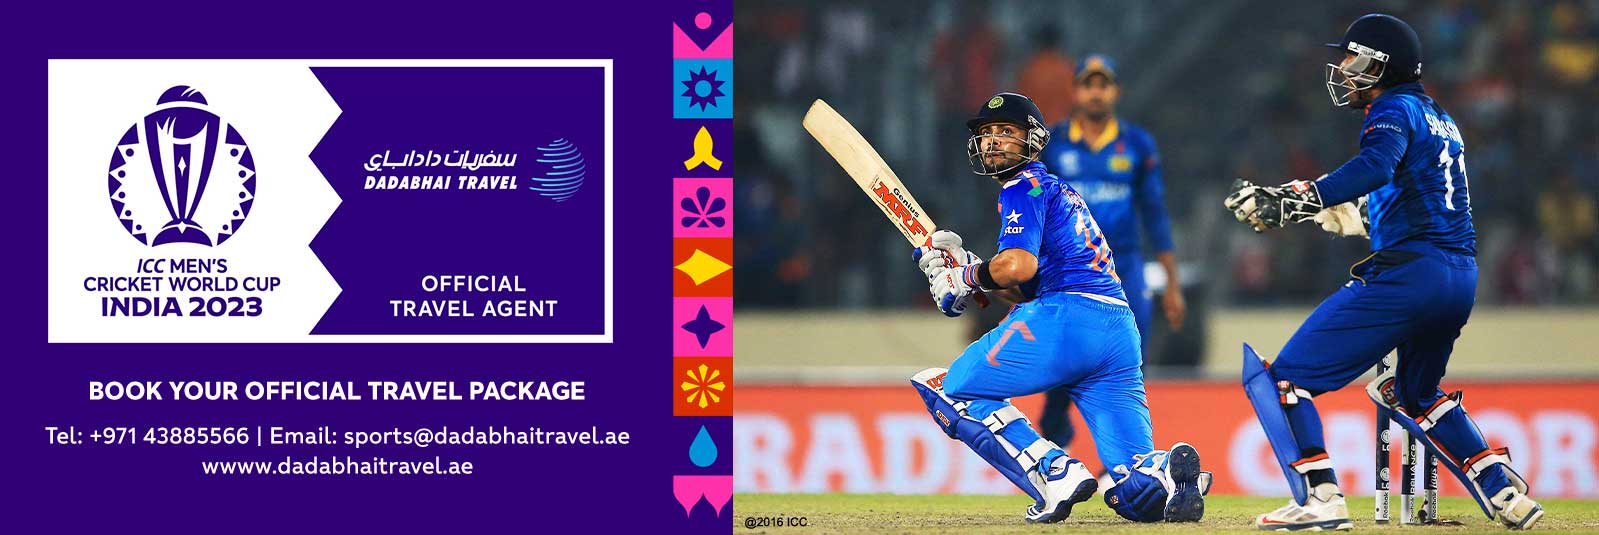 ICC Men’s Cricket World Cup India 2023 Match Tickets and Travel Package